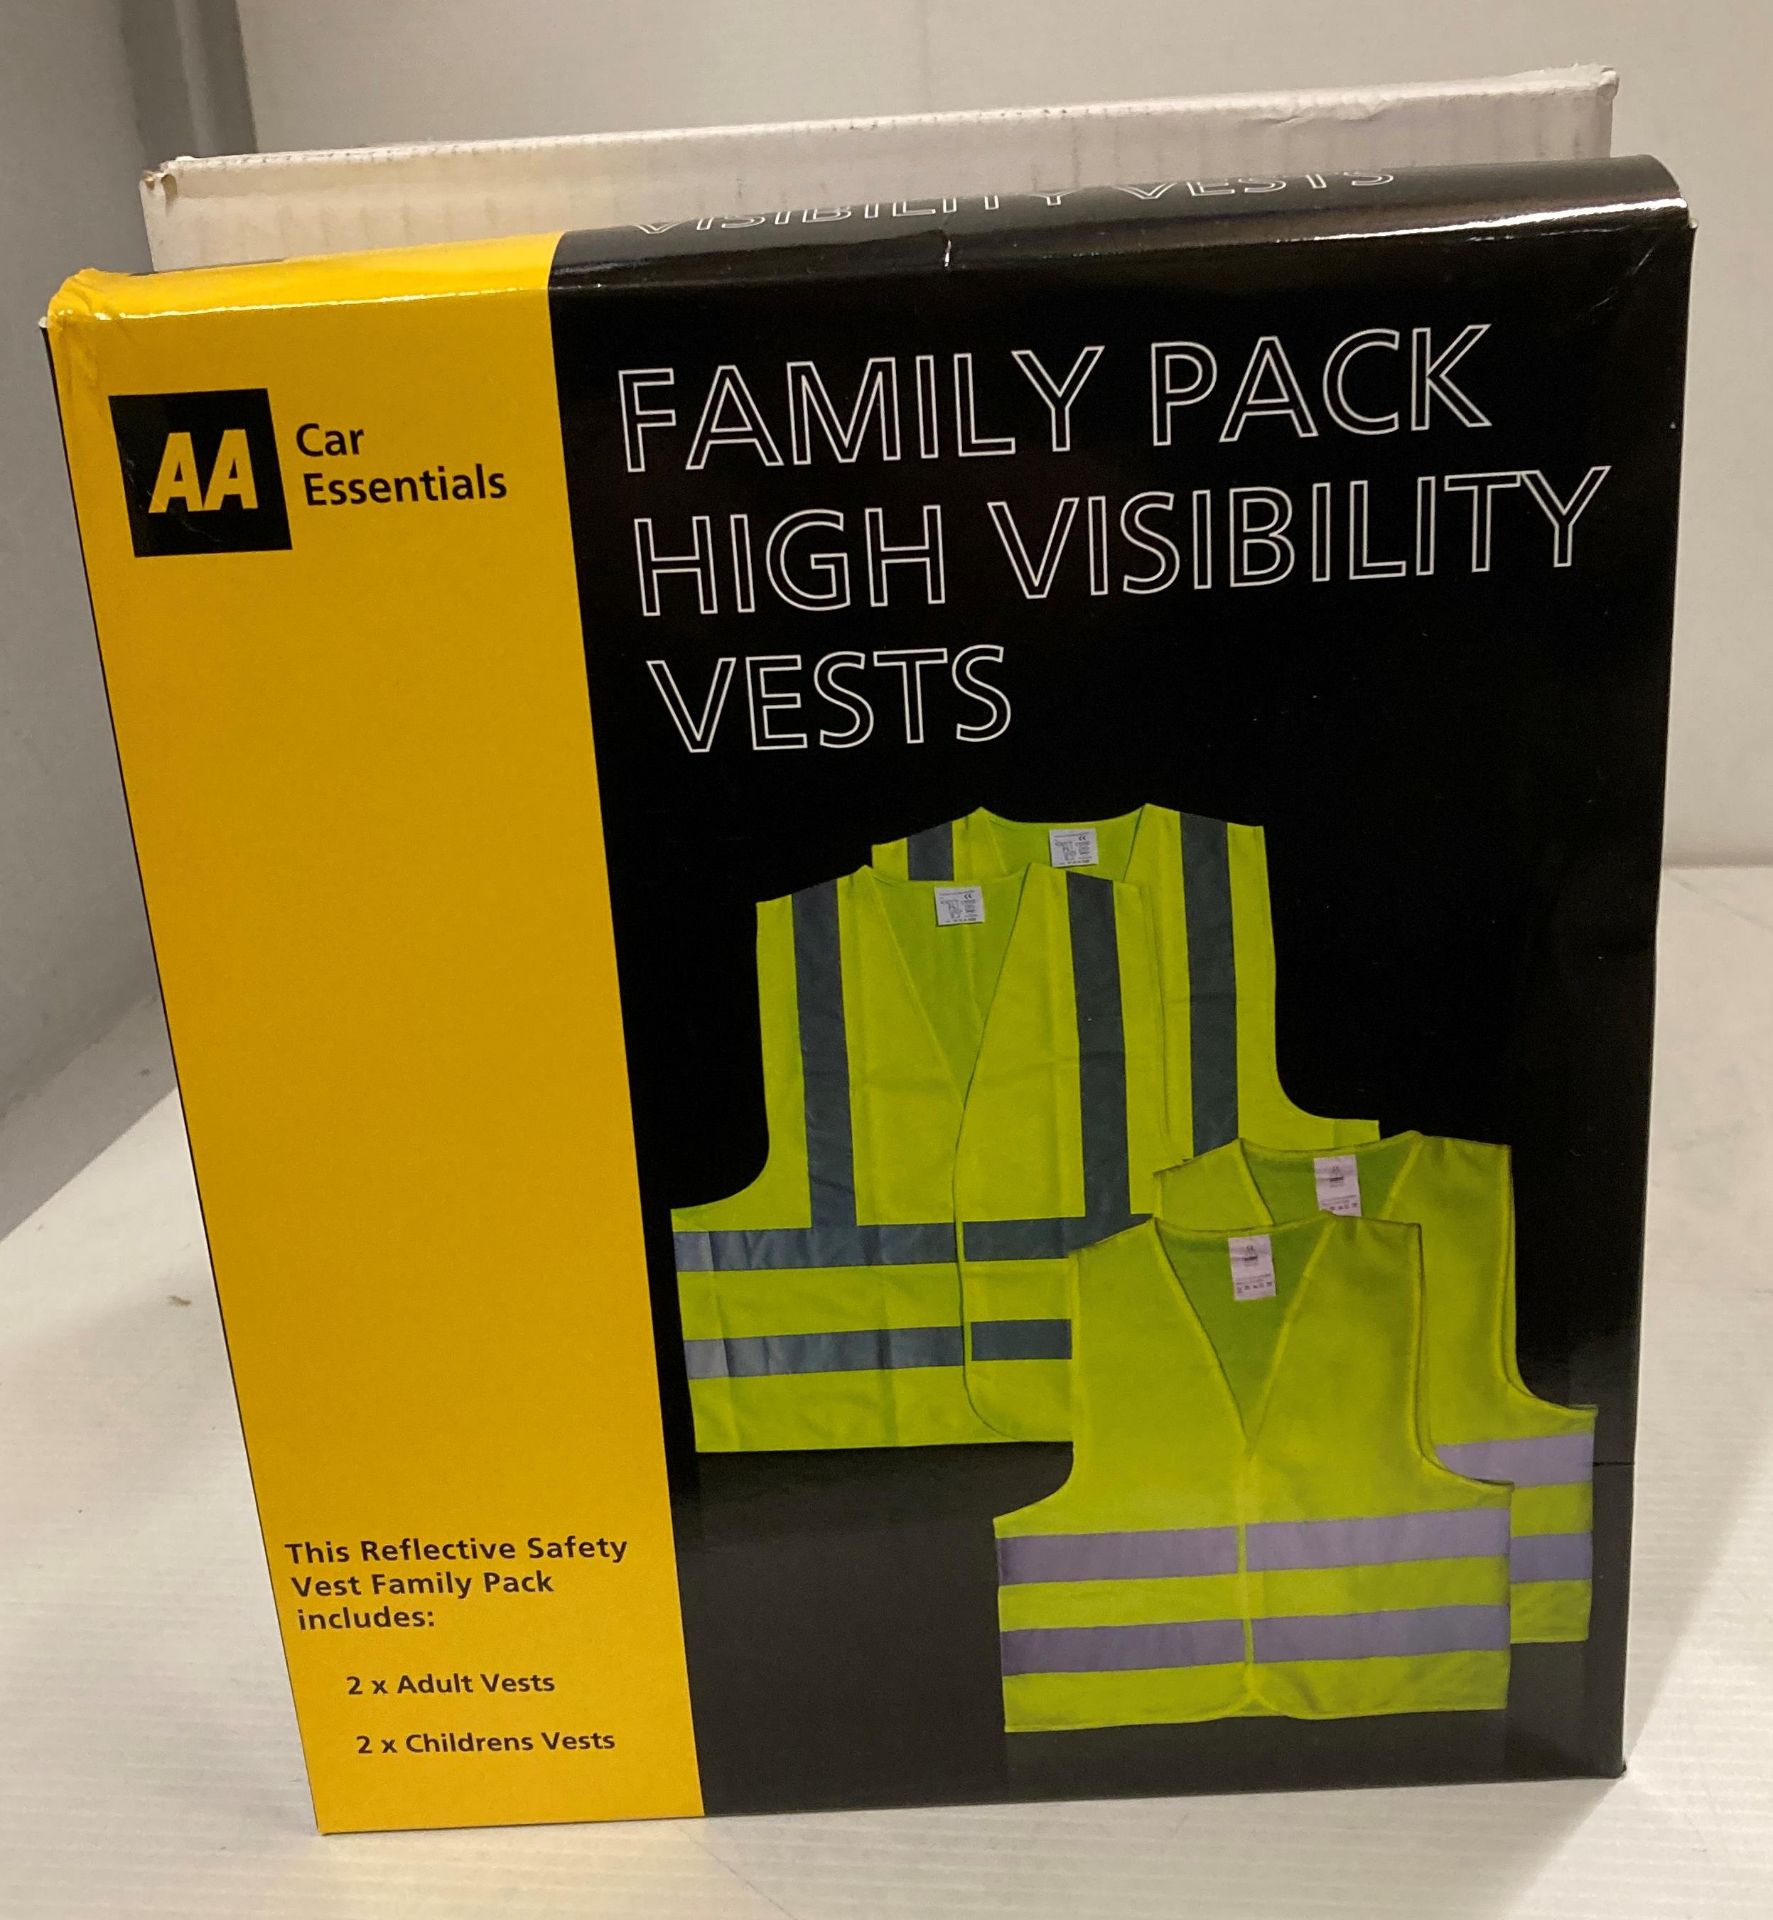 20 packs of AA family pack high visibility vests (5 outer boxes) (U12)